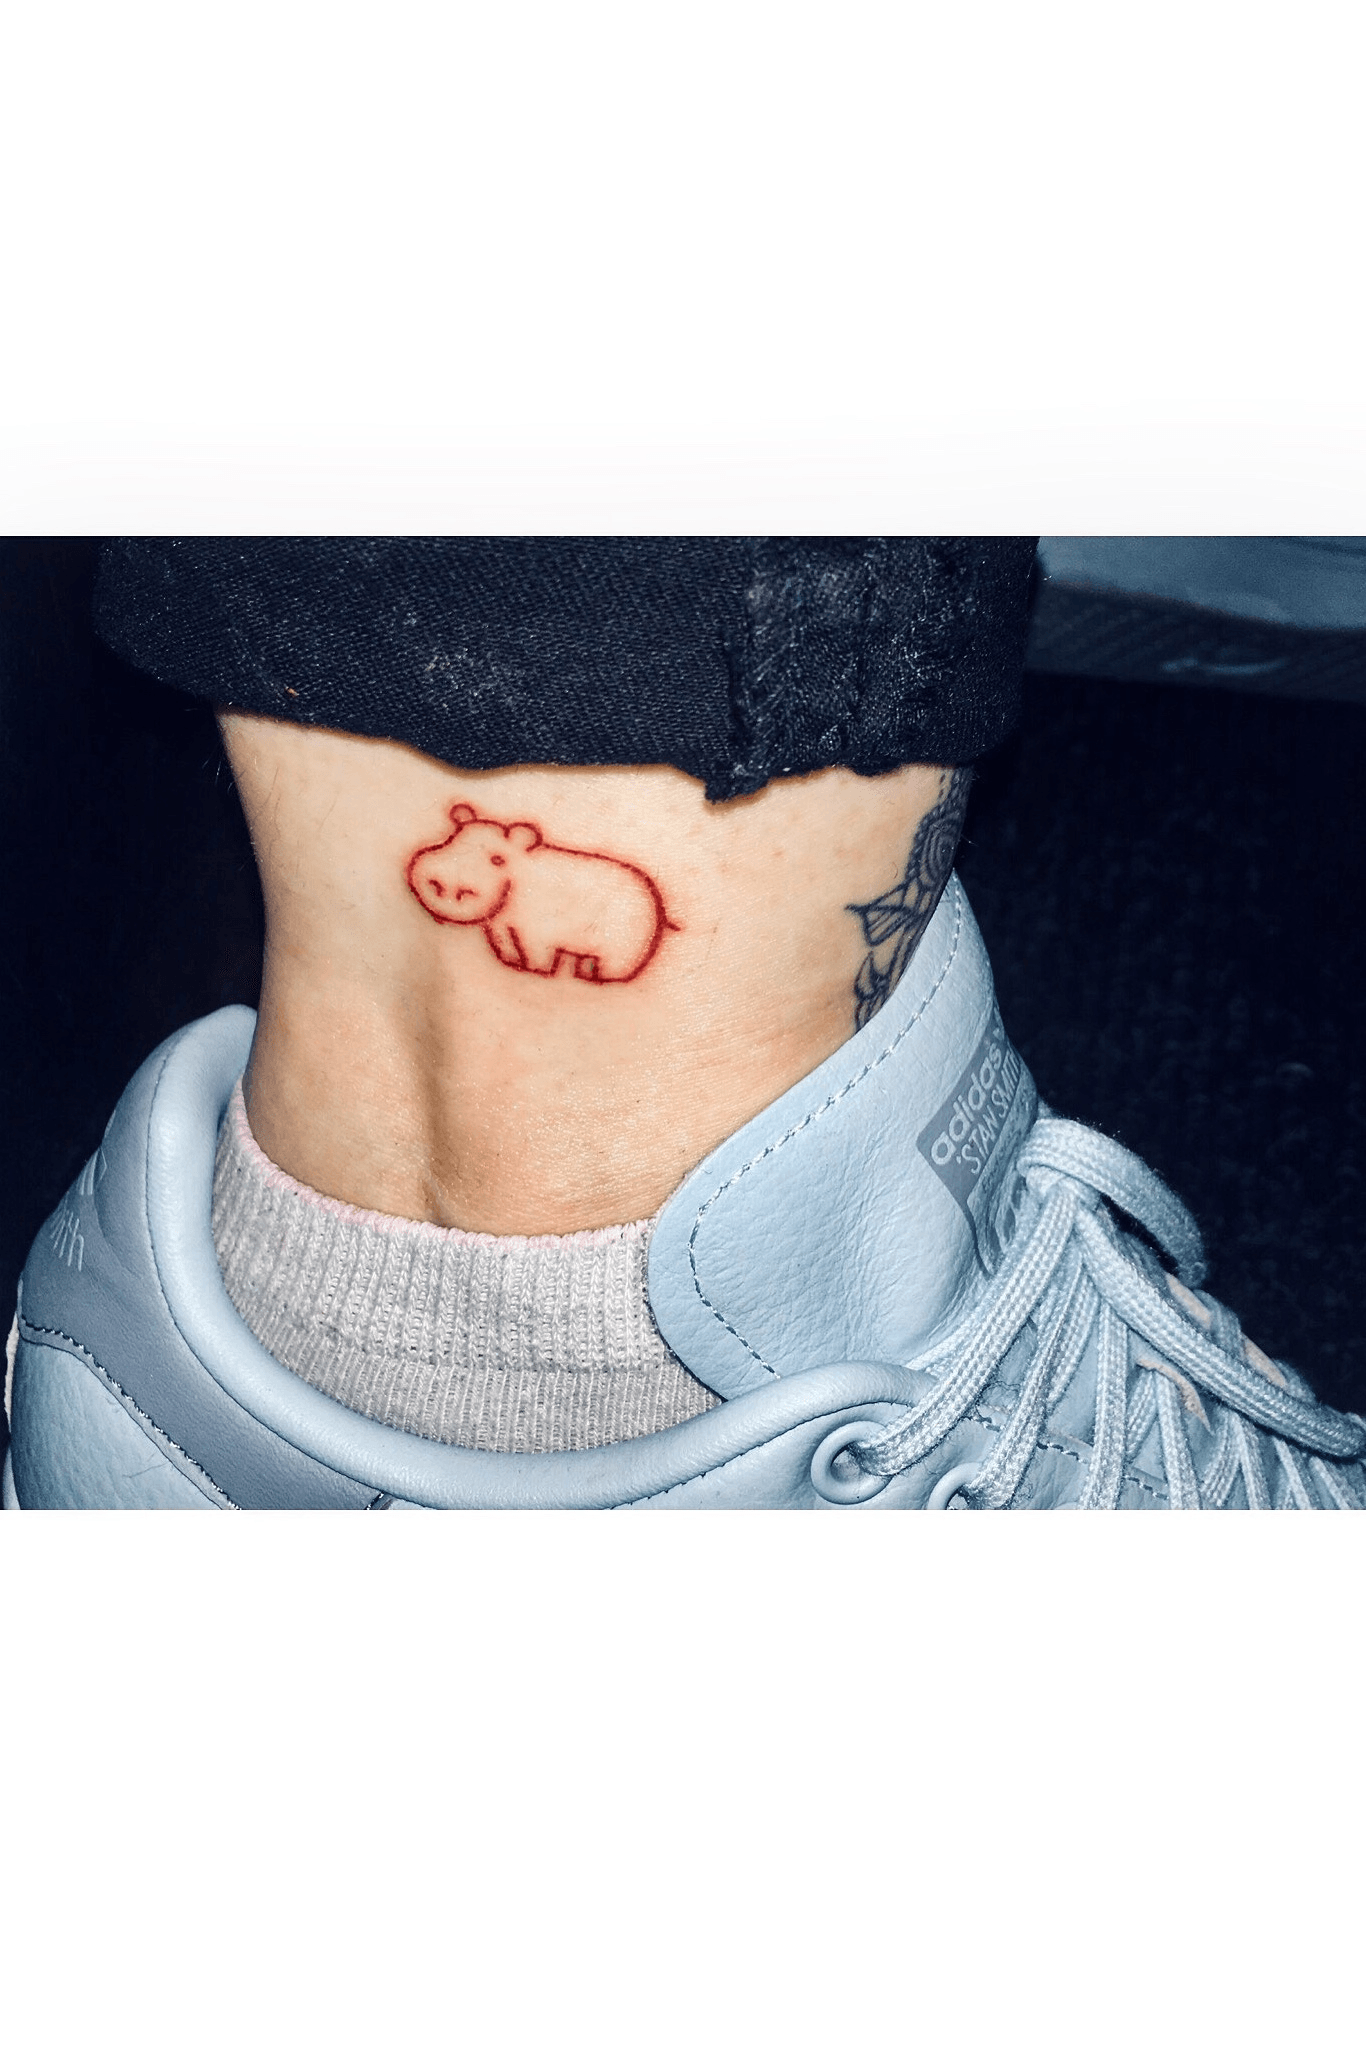 917 Hippo Tattoo Images Stock Photos  Vectors  Shutterstock